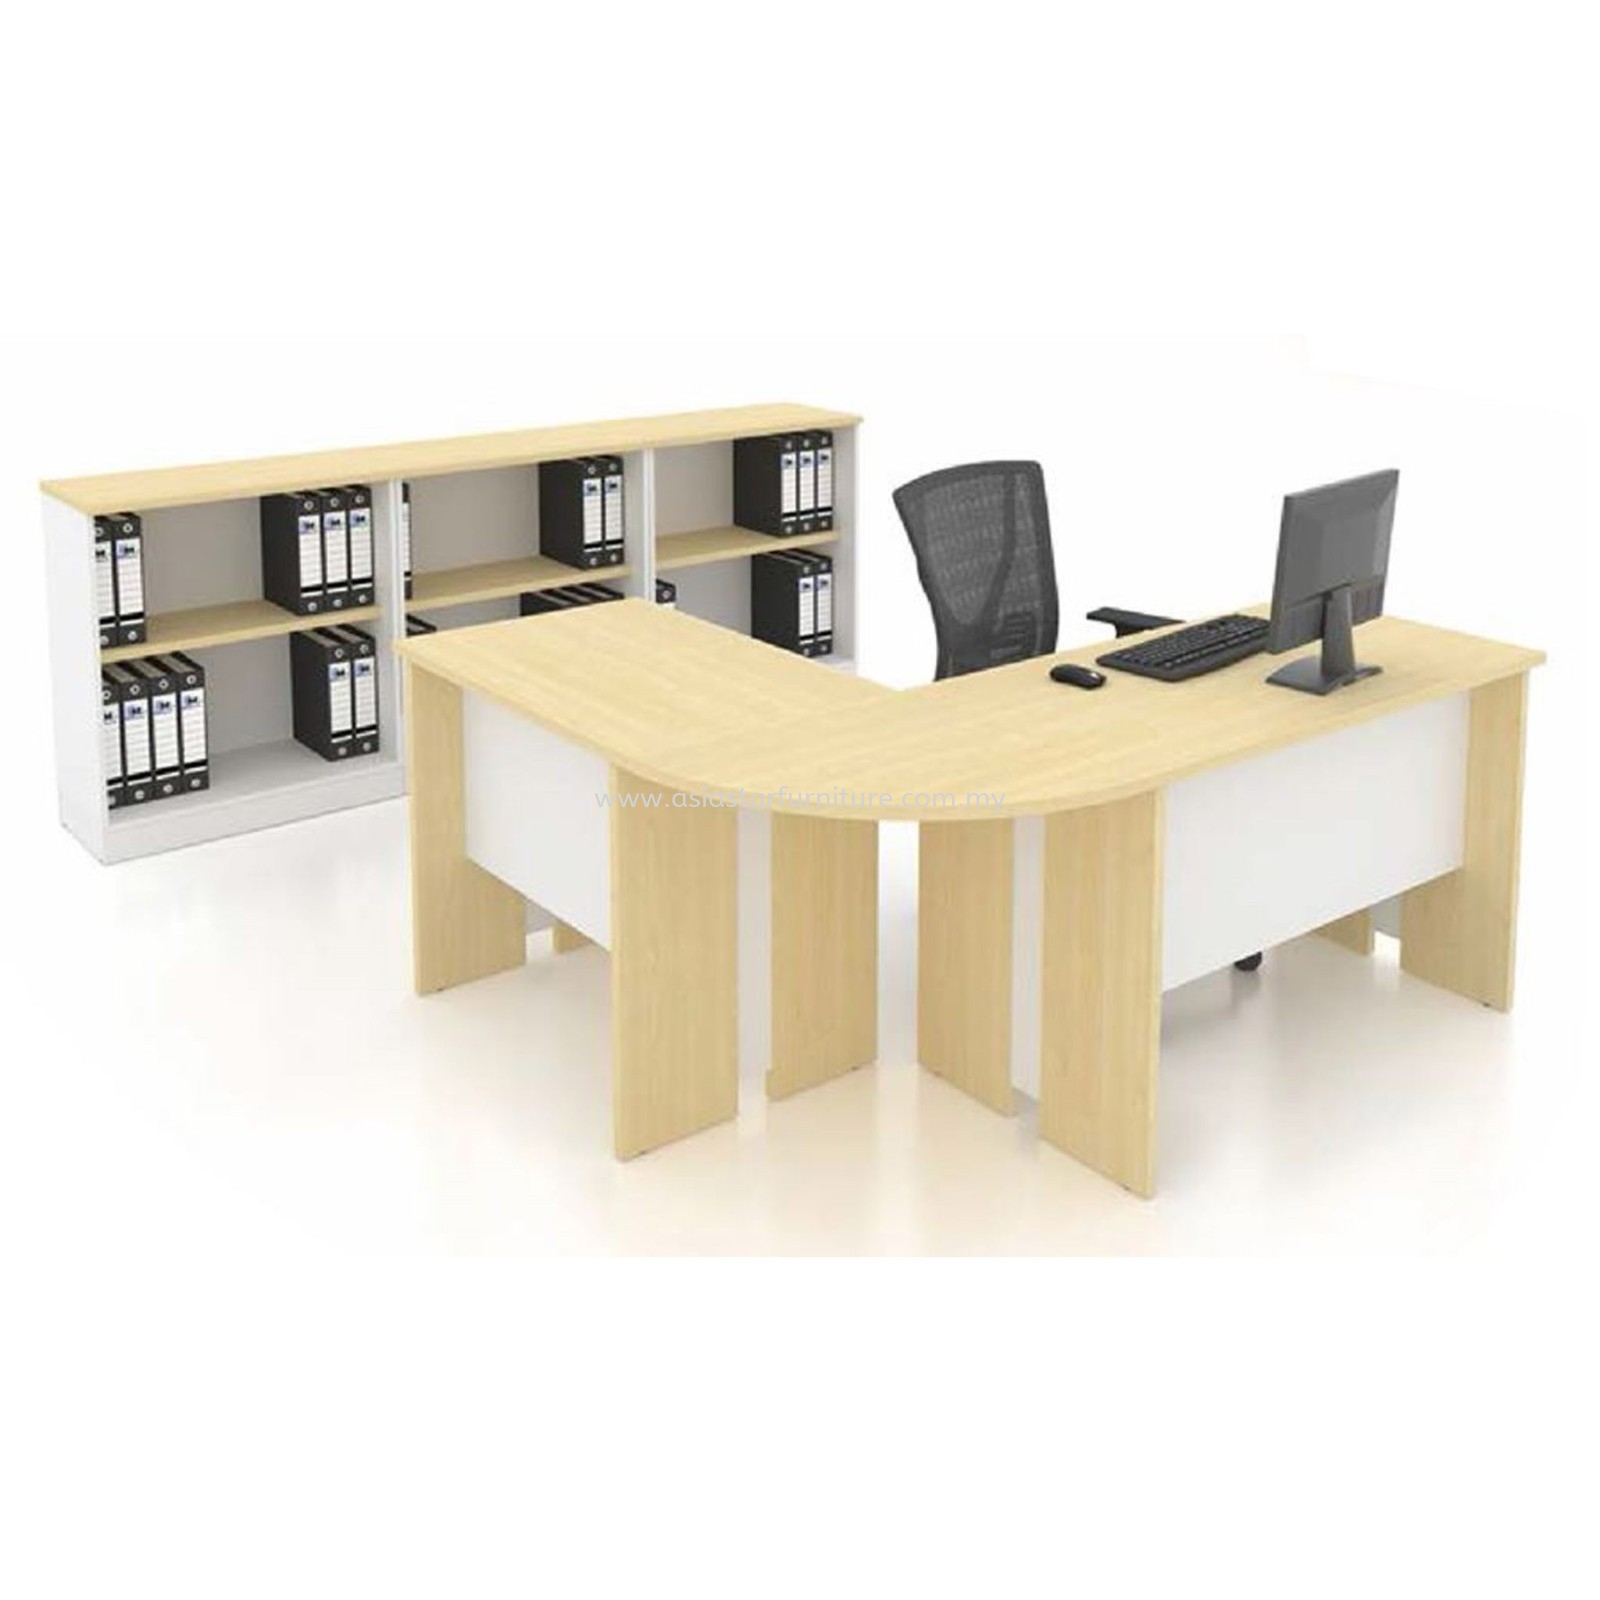 FAMAH 4' OFFICE TABLE | STUDY TABLE | COMPUTER TABLE - office table Seri Kembangan | office table Sri Petaling | office table Bukit Jalil | office table Sungai Besi